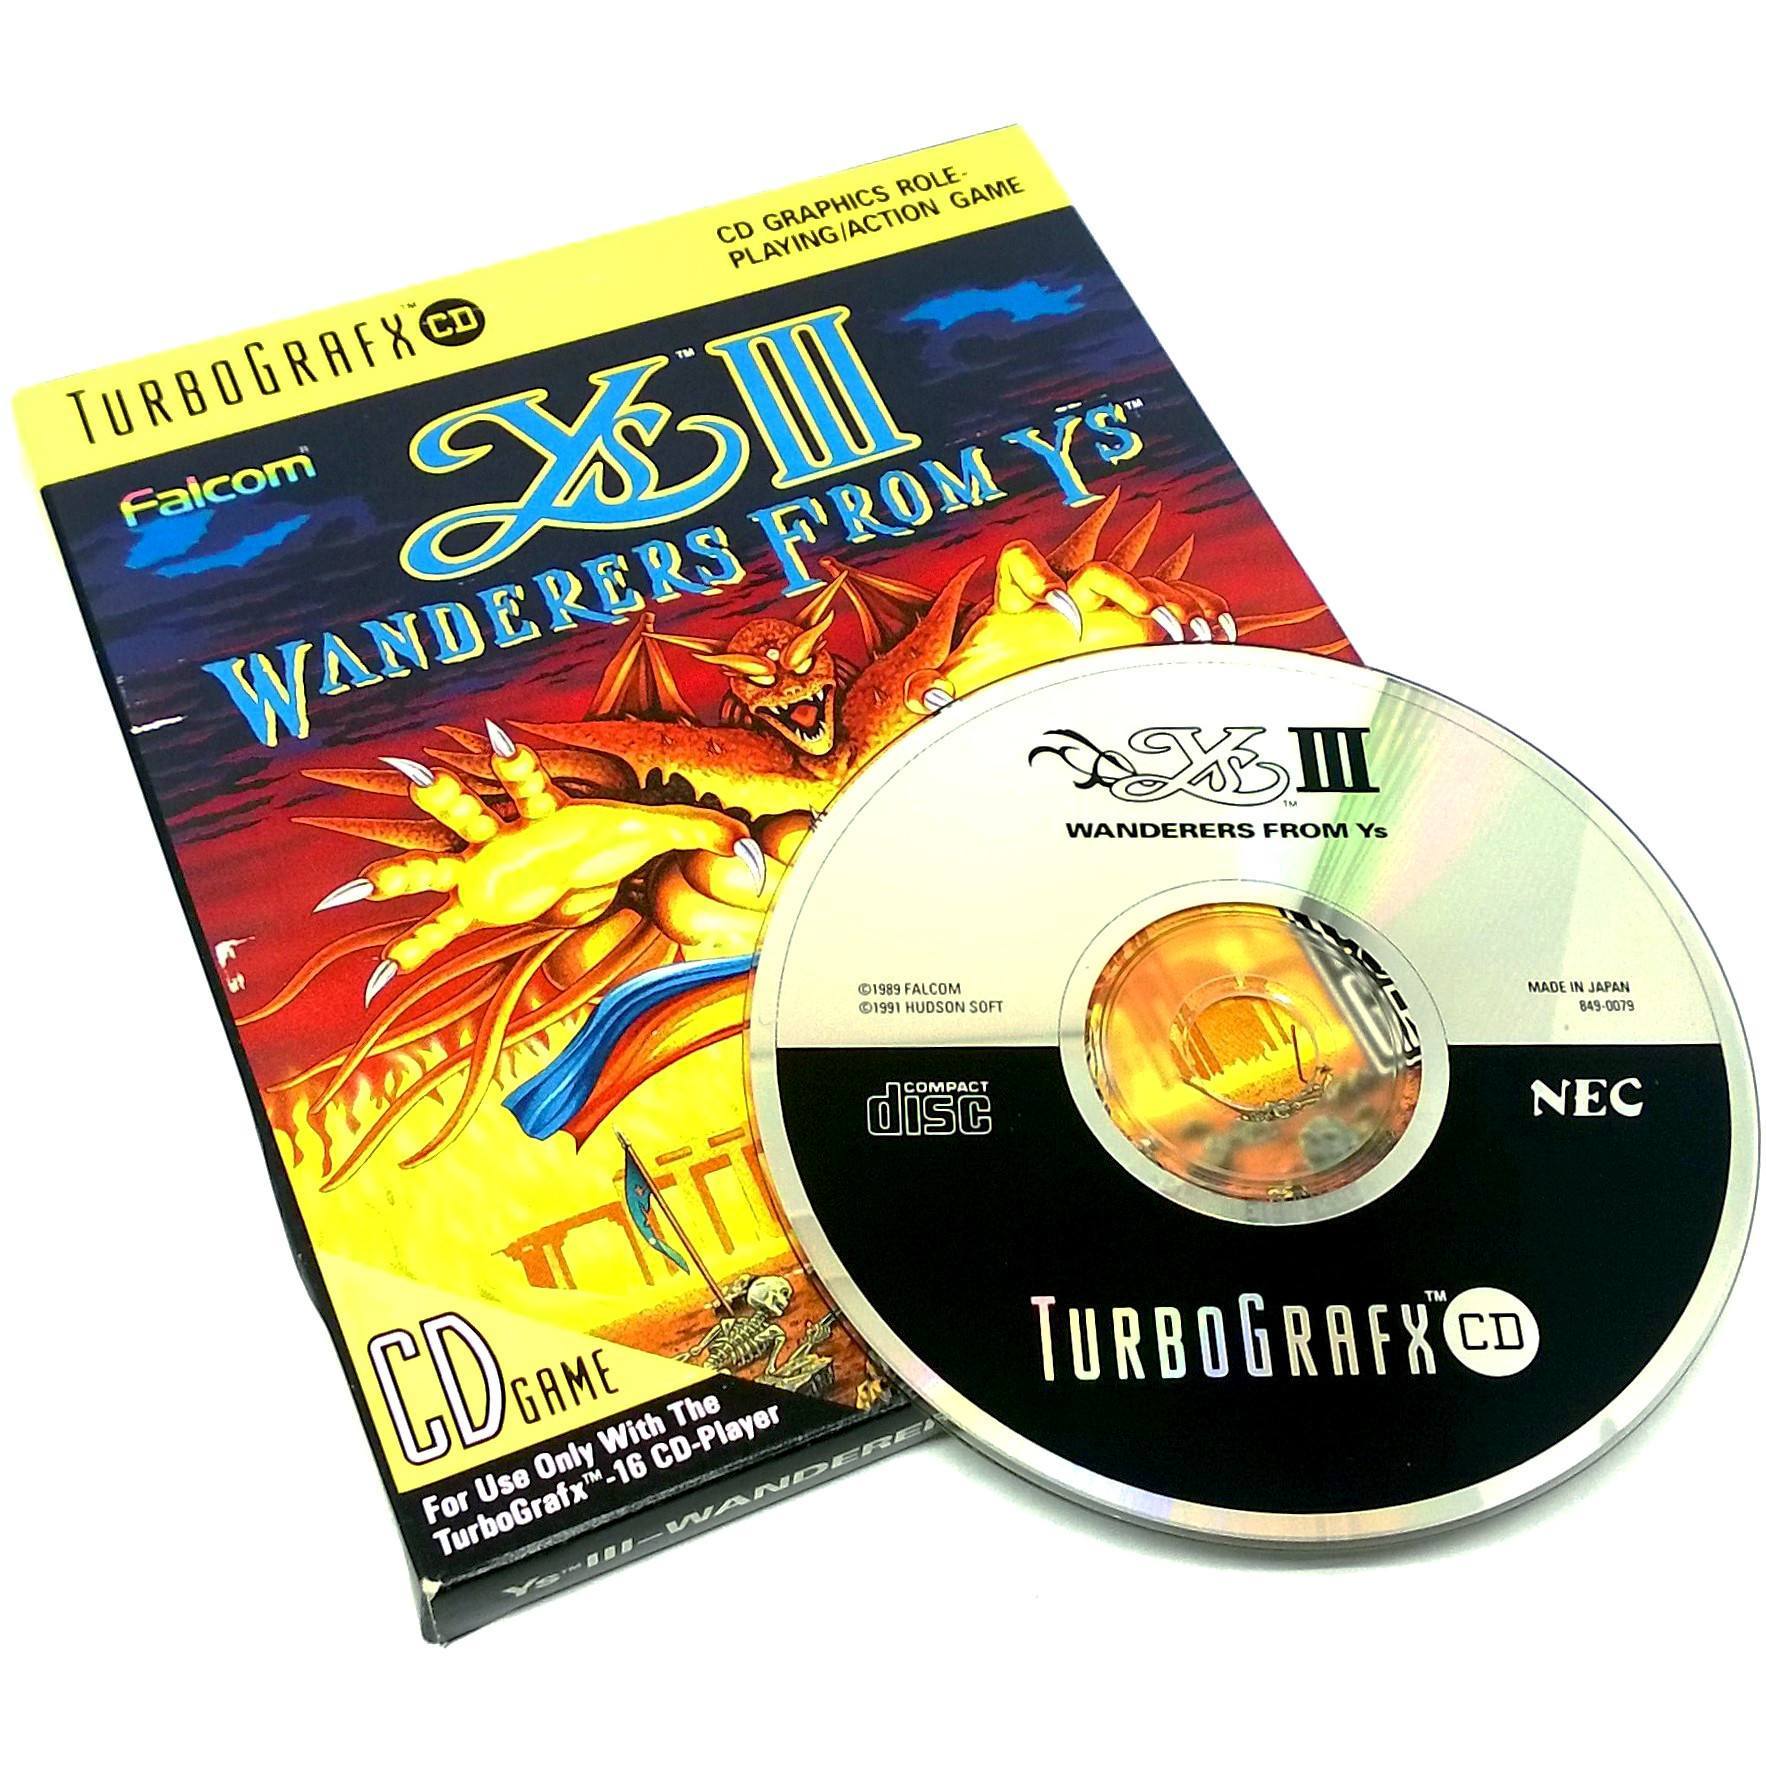 Ys III: Wanderers from Ys for TurboGrafx-16 CD